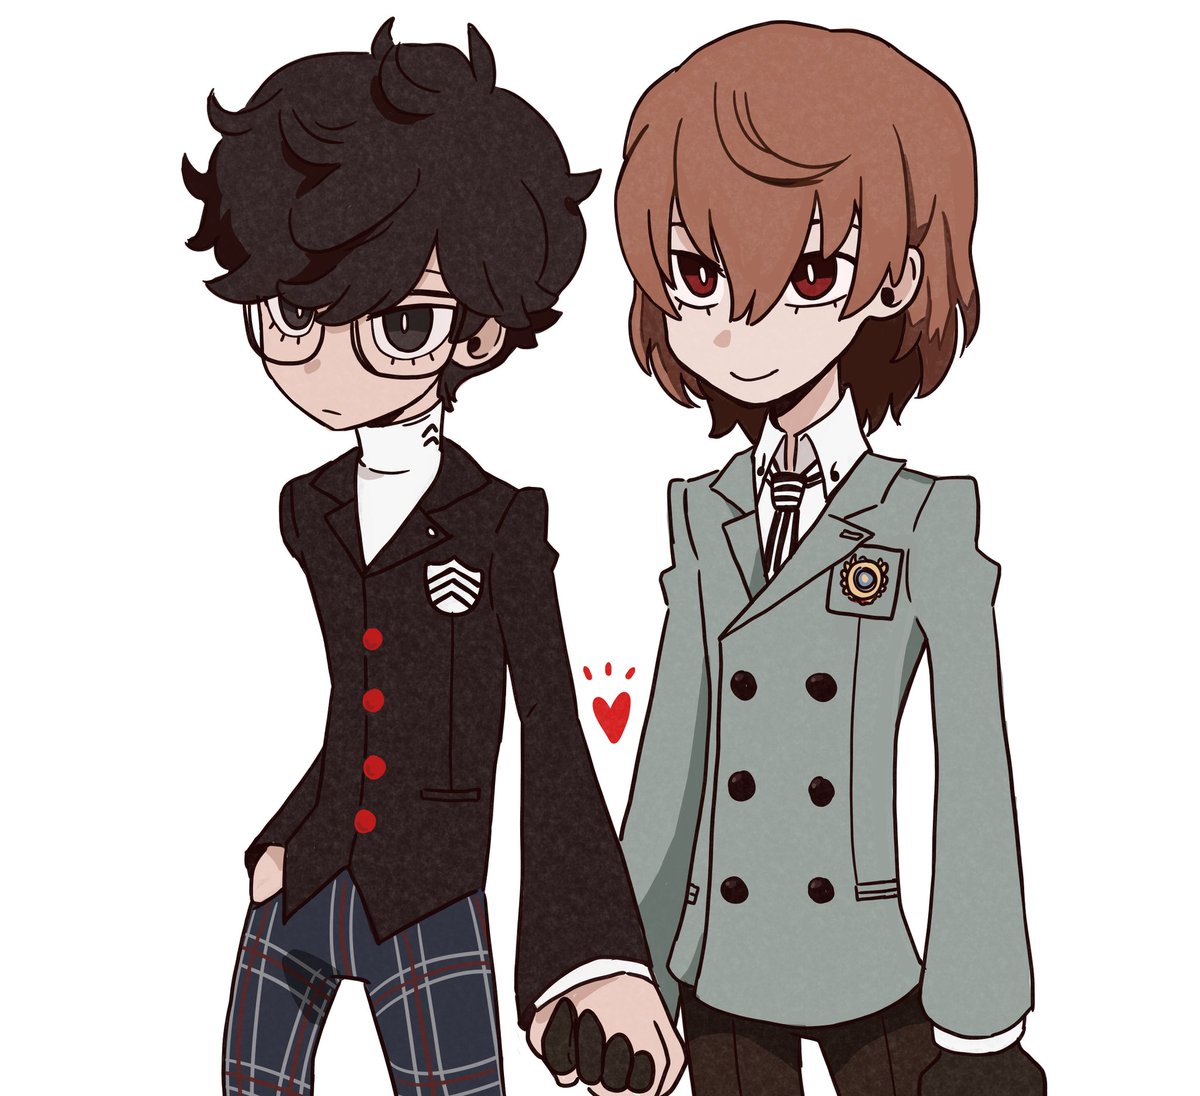 this is all i ask for Atlus please 
#shuake